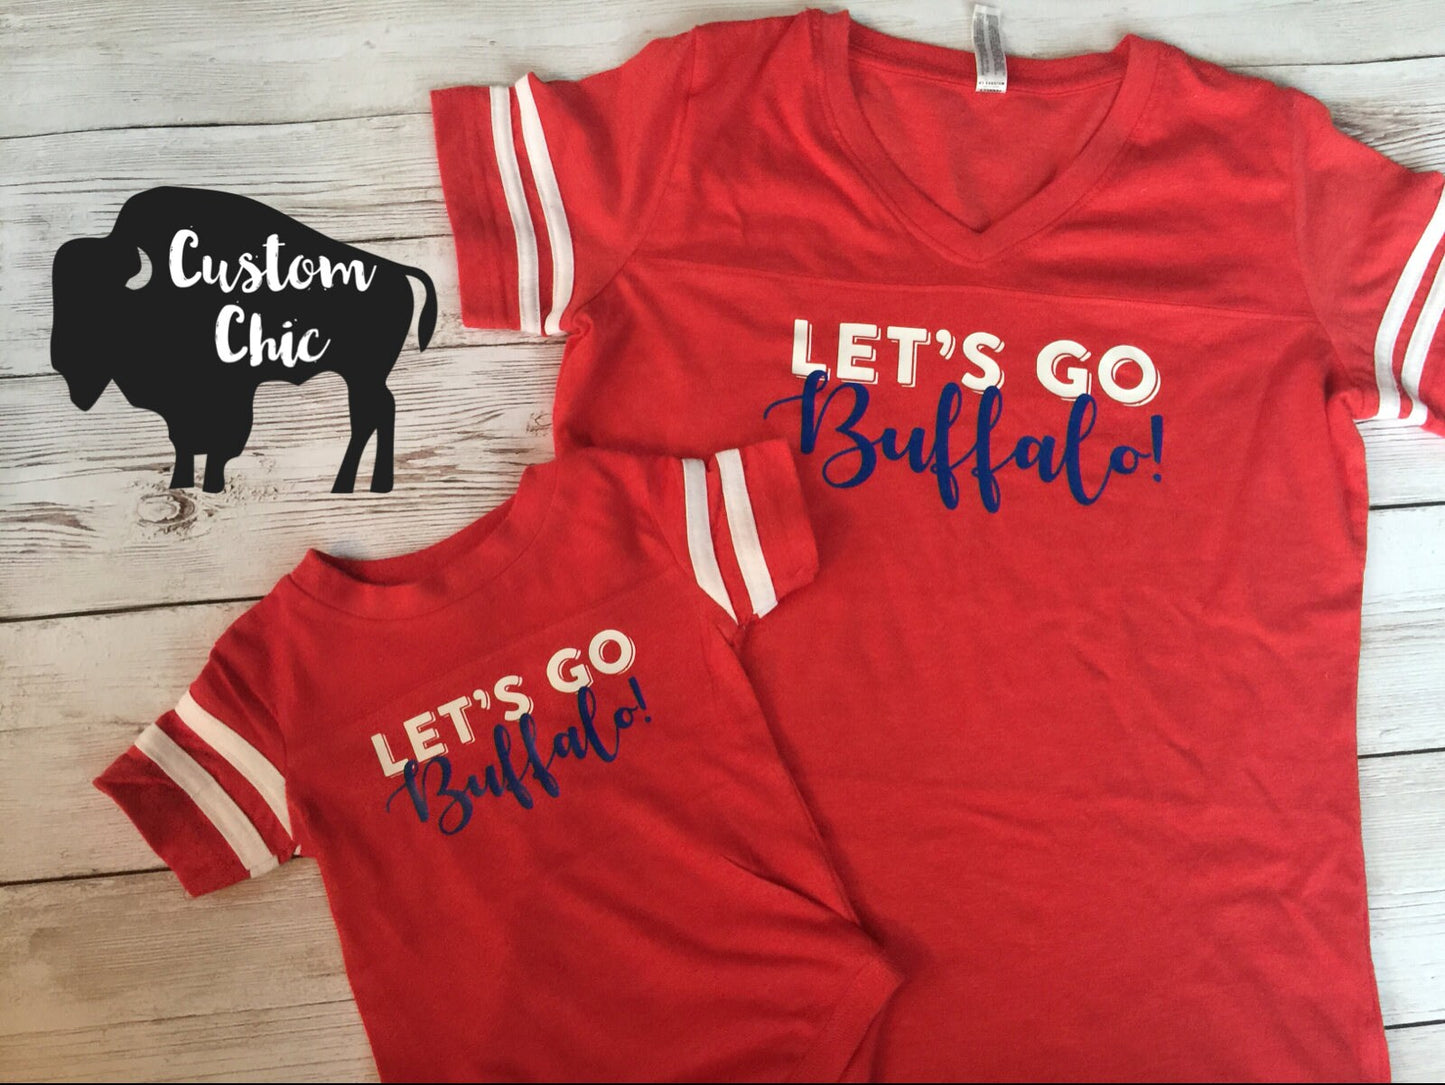 Buffalo Football mommy and me outfits